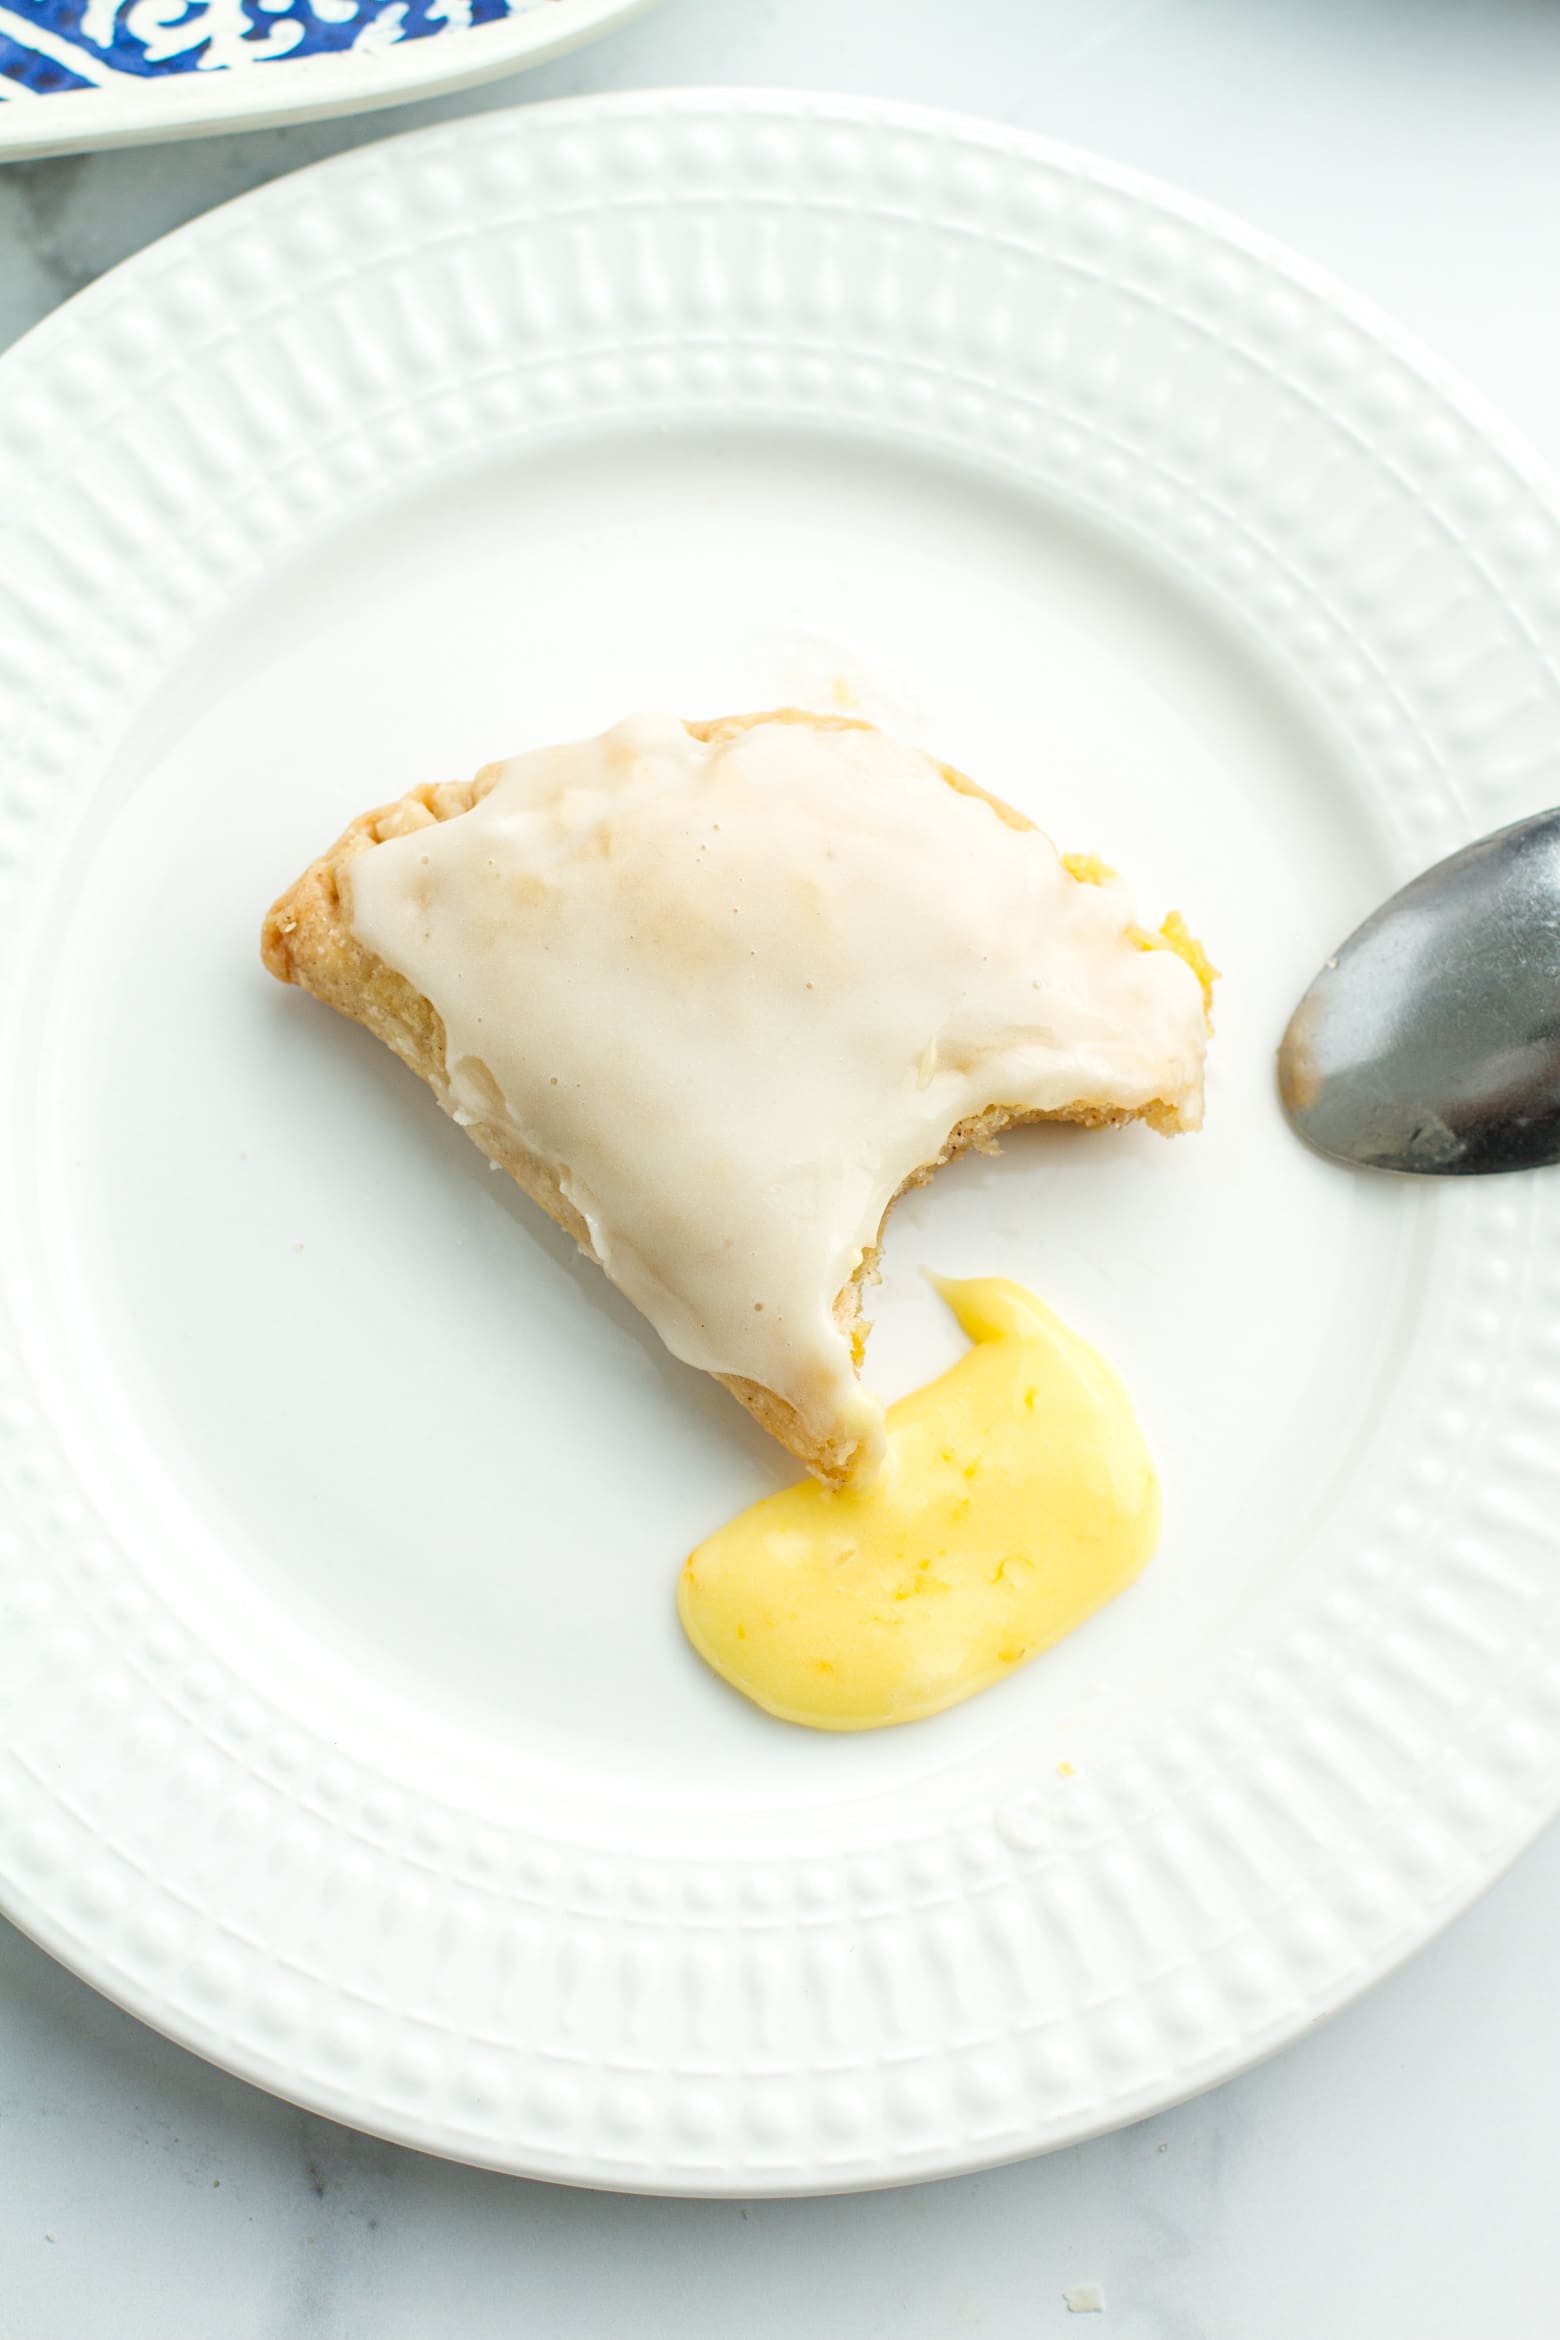 Lemon hand pie on a plate with a bite missing with some lemon curd on the plate.